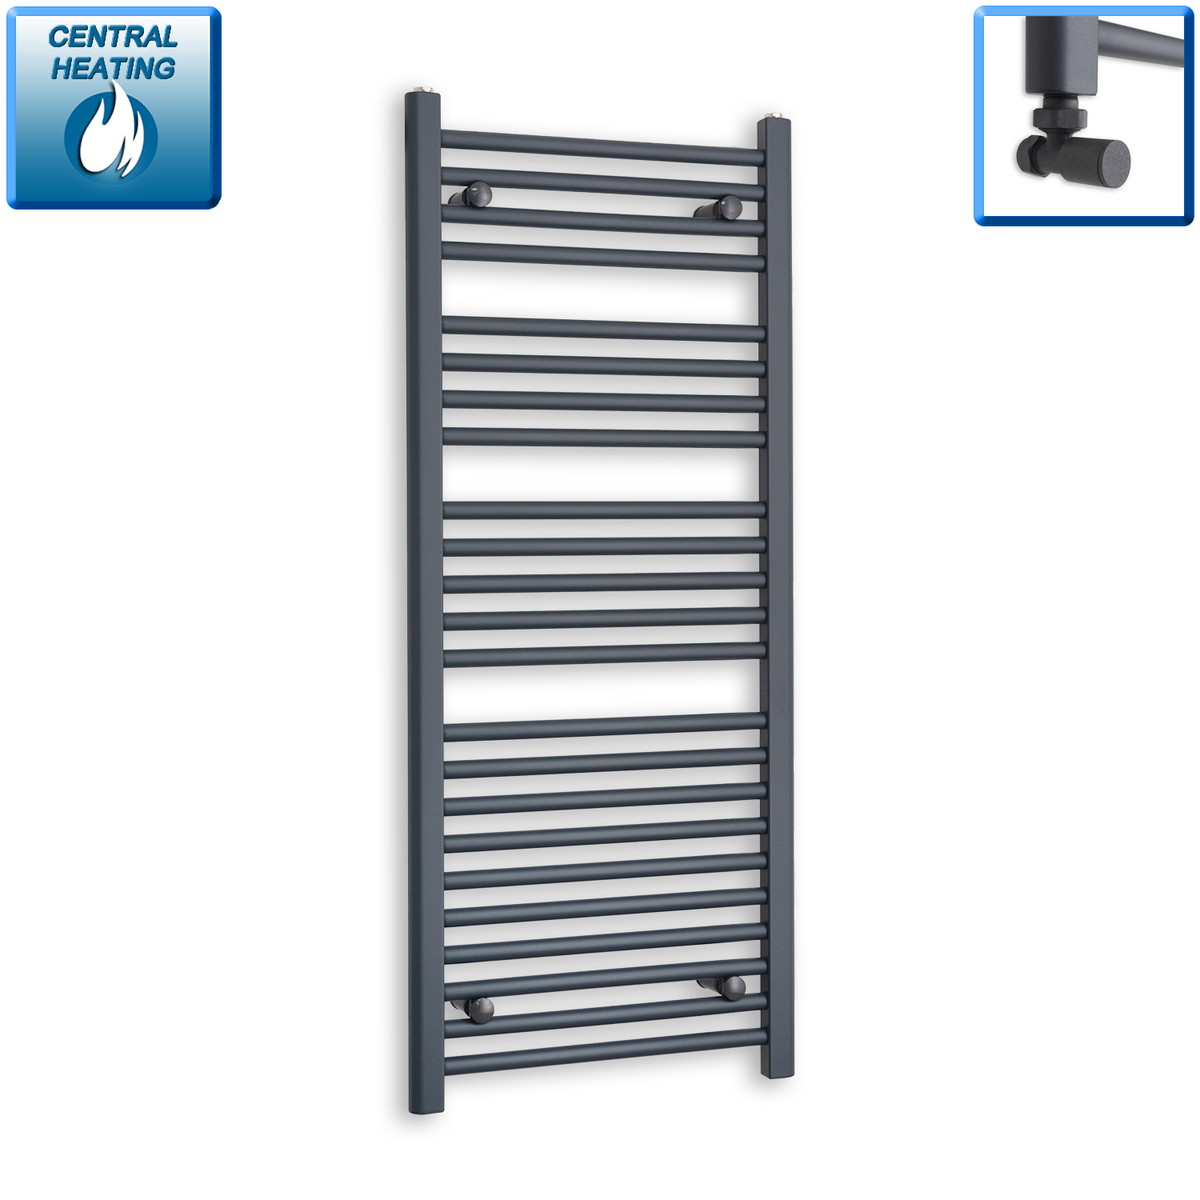 1200 x 500 Heated Straight Anthracite Towel Radiator central heating